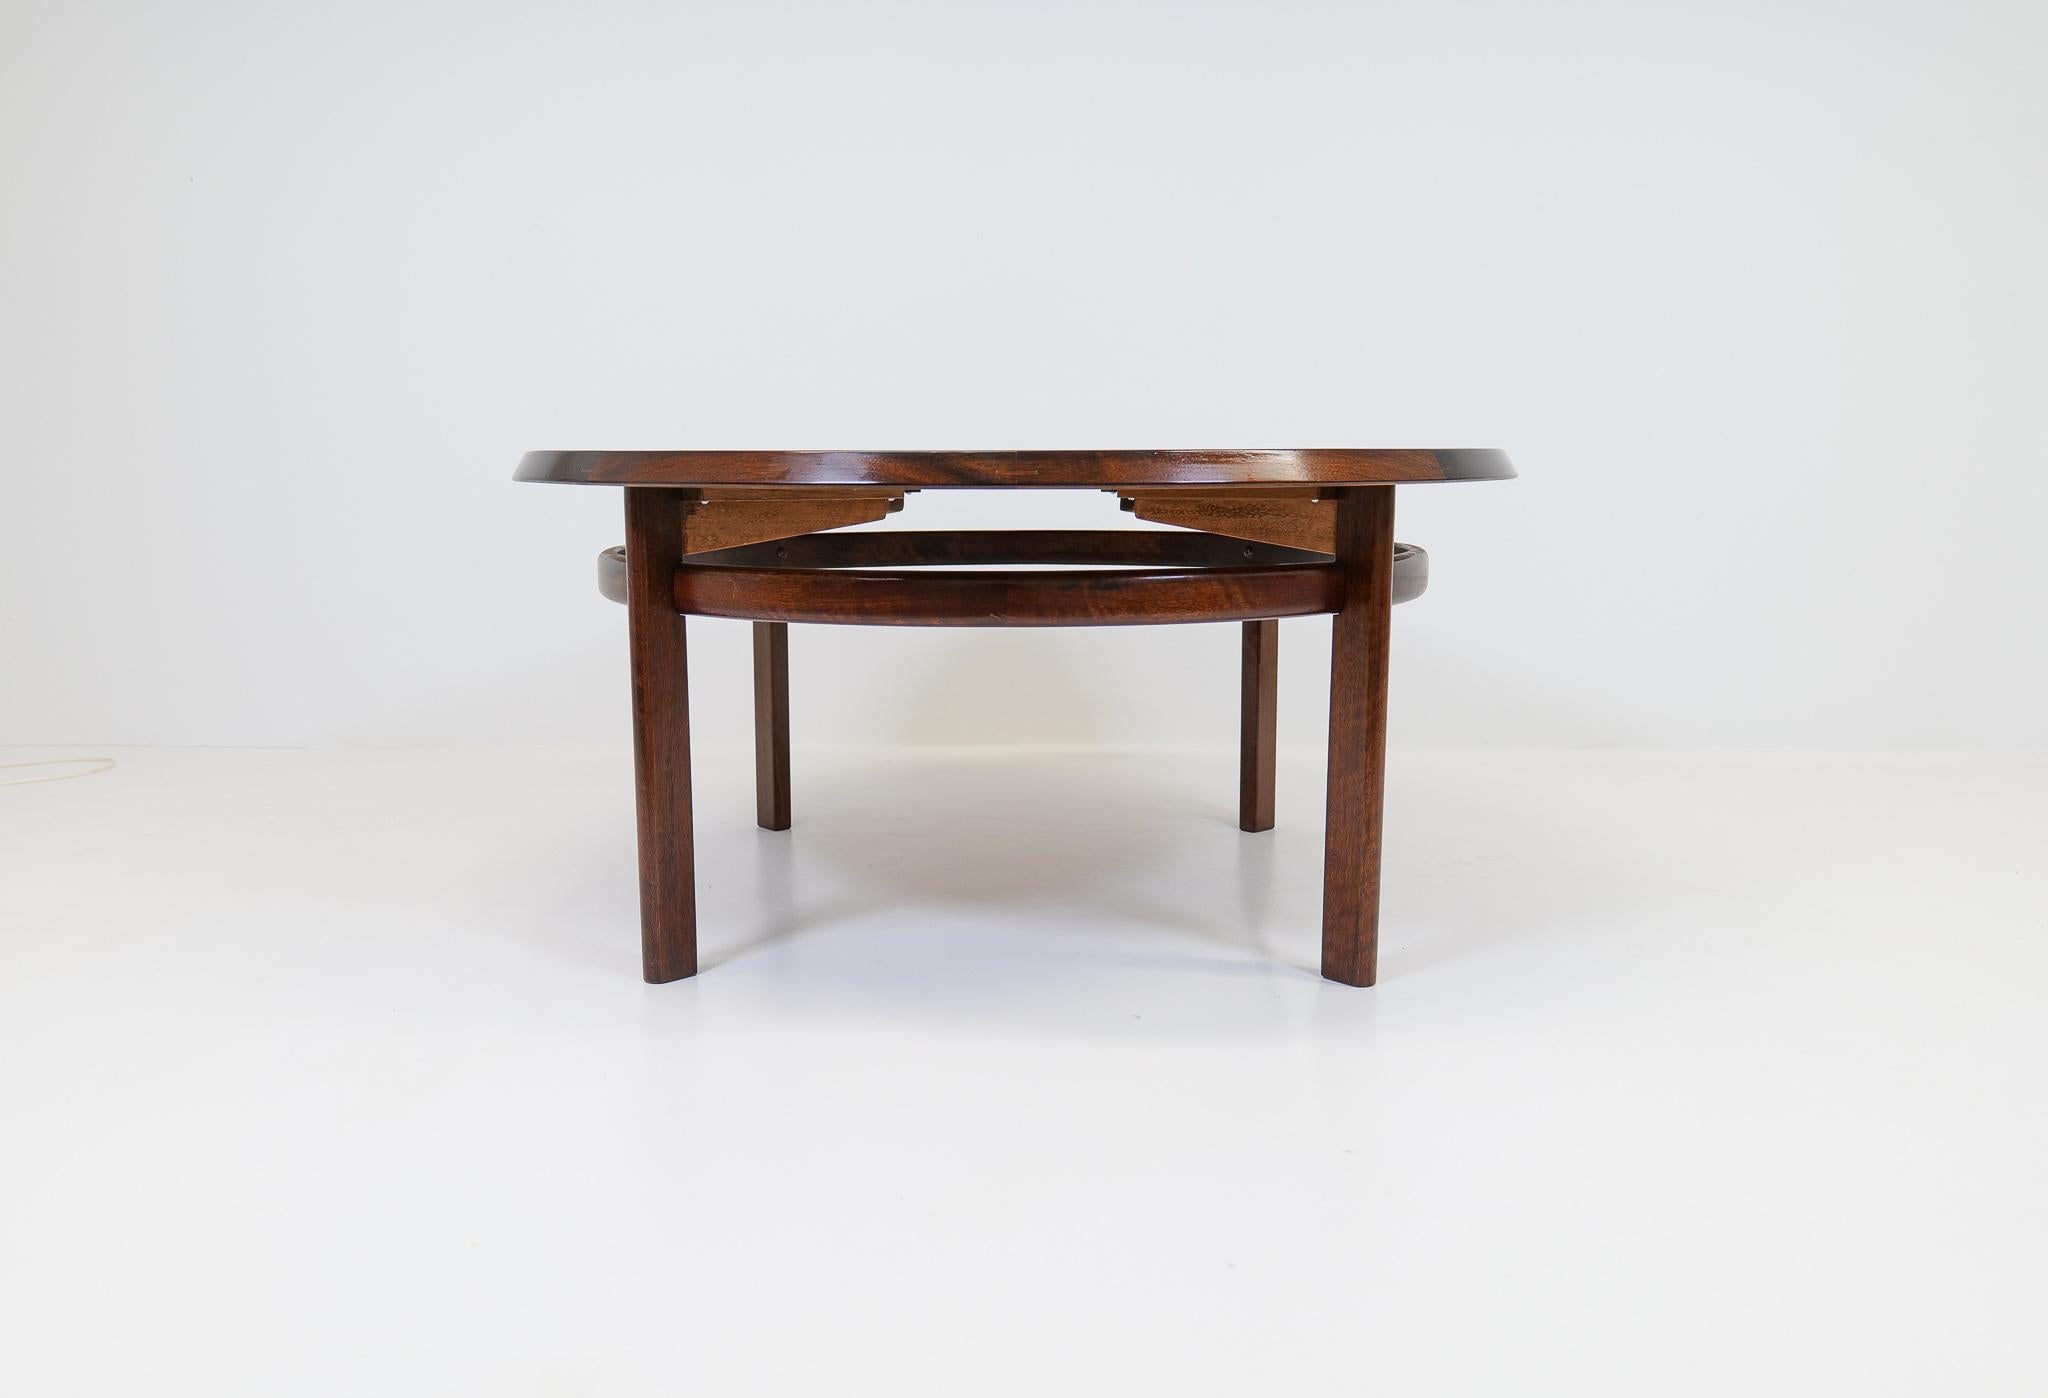 This coffee table of very high quality was produced at Haug Sneekeri AB Norway for Bruksbo Tegnekontor. The well-known architect Torbjörn Afdal was the designer. He made this round coffee table into perfection. Made in Brazilian rosewood this table